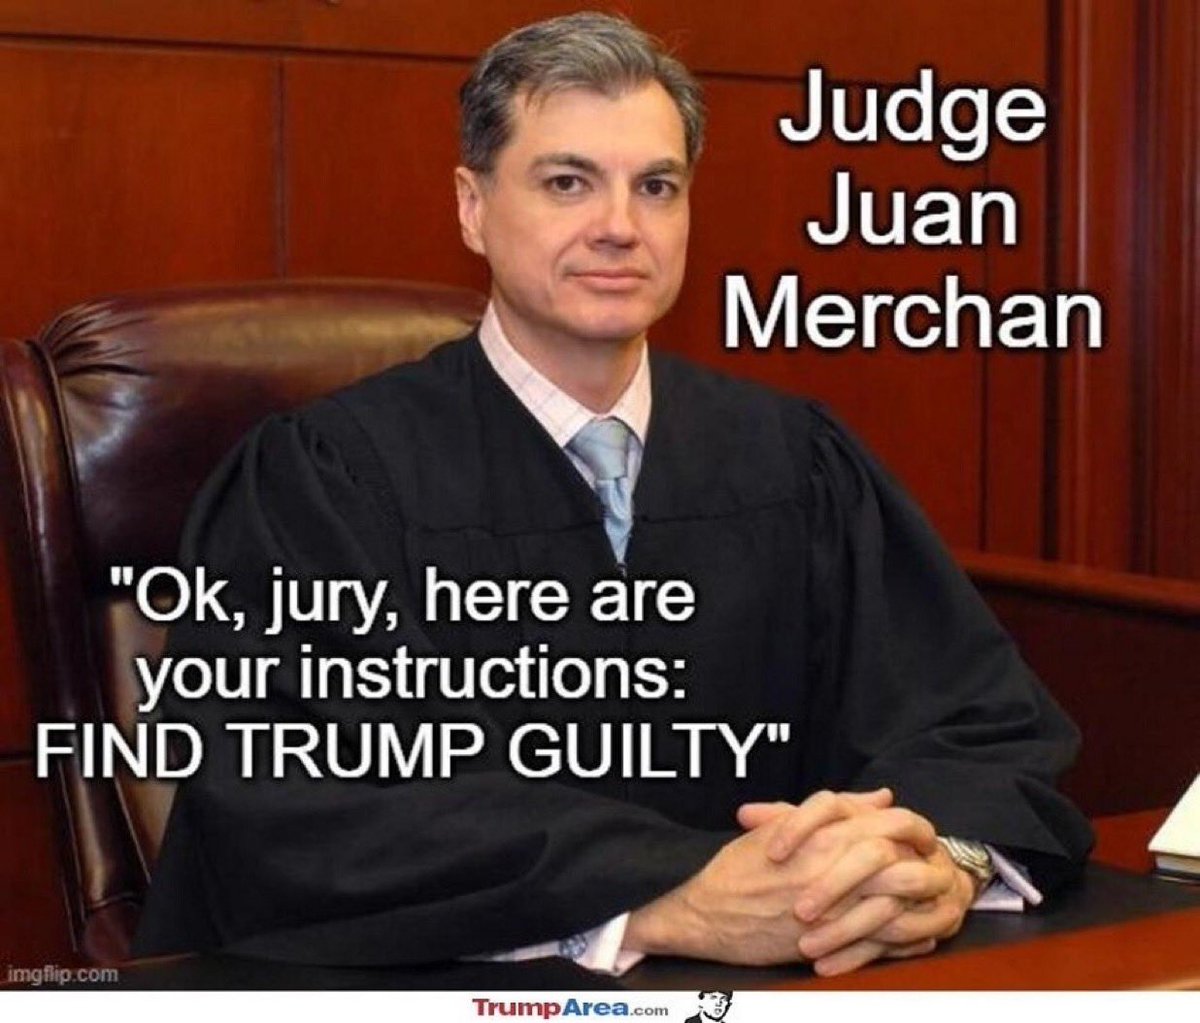 That’s exactly what this POS judge wants no matter what. I’m sick of the two tiered justice system in this country. 🤬🖕🏼